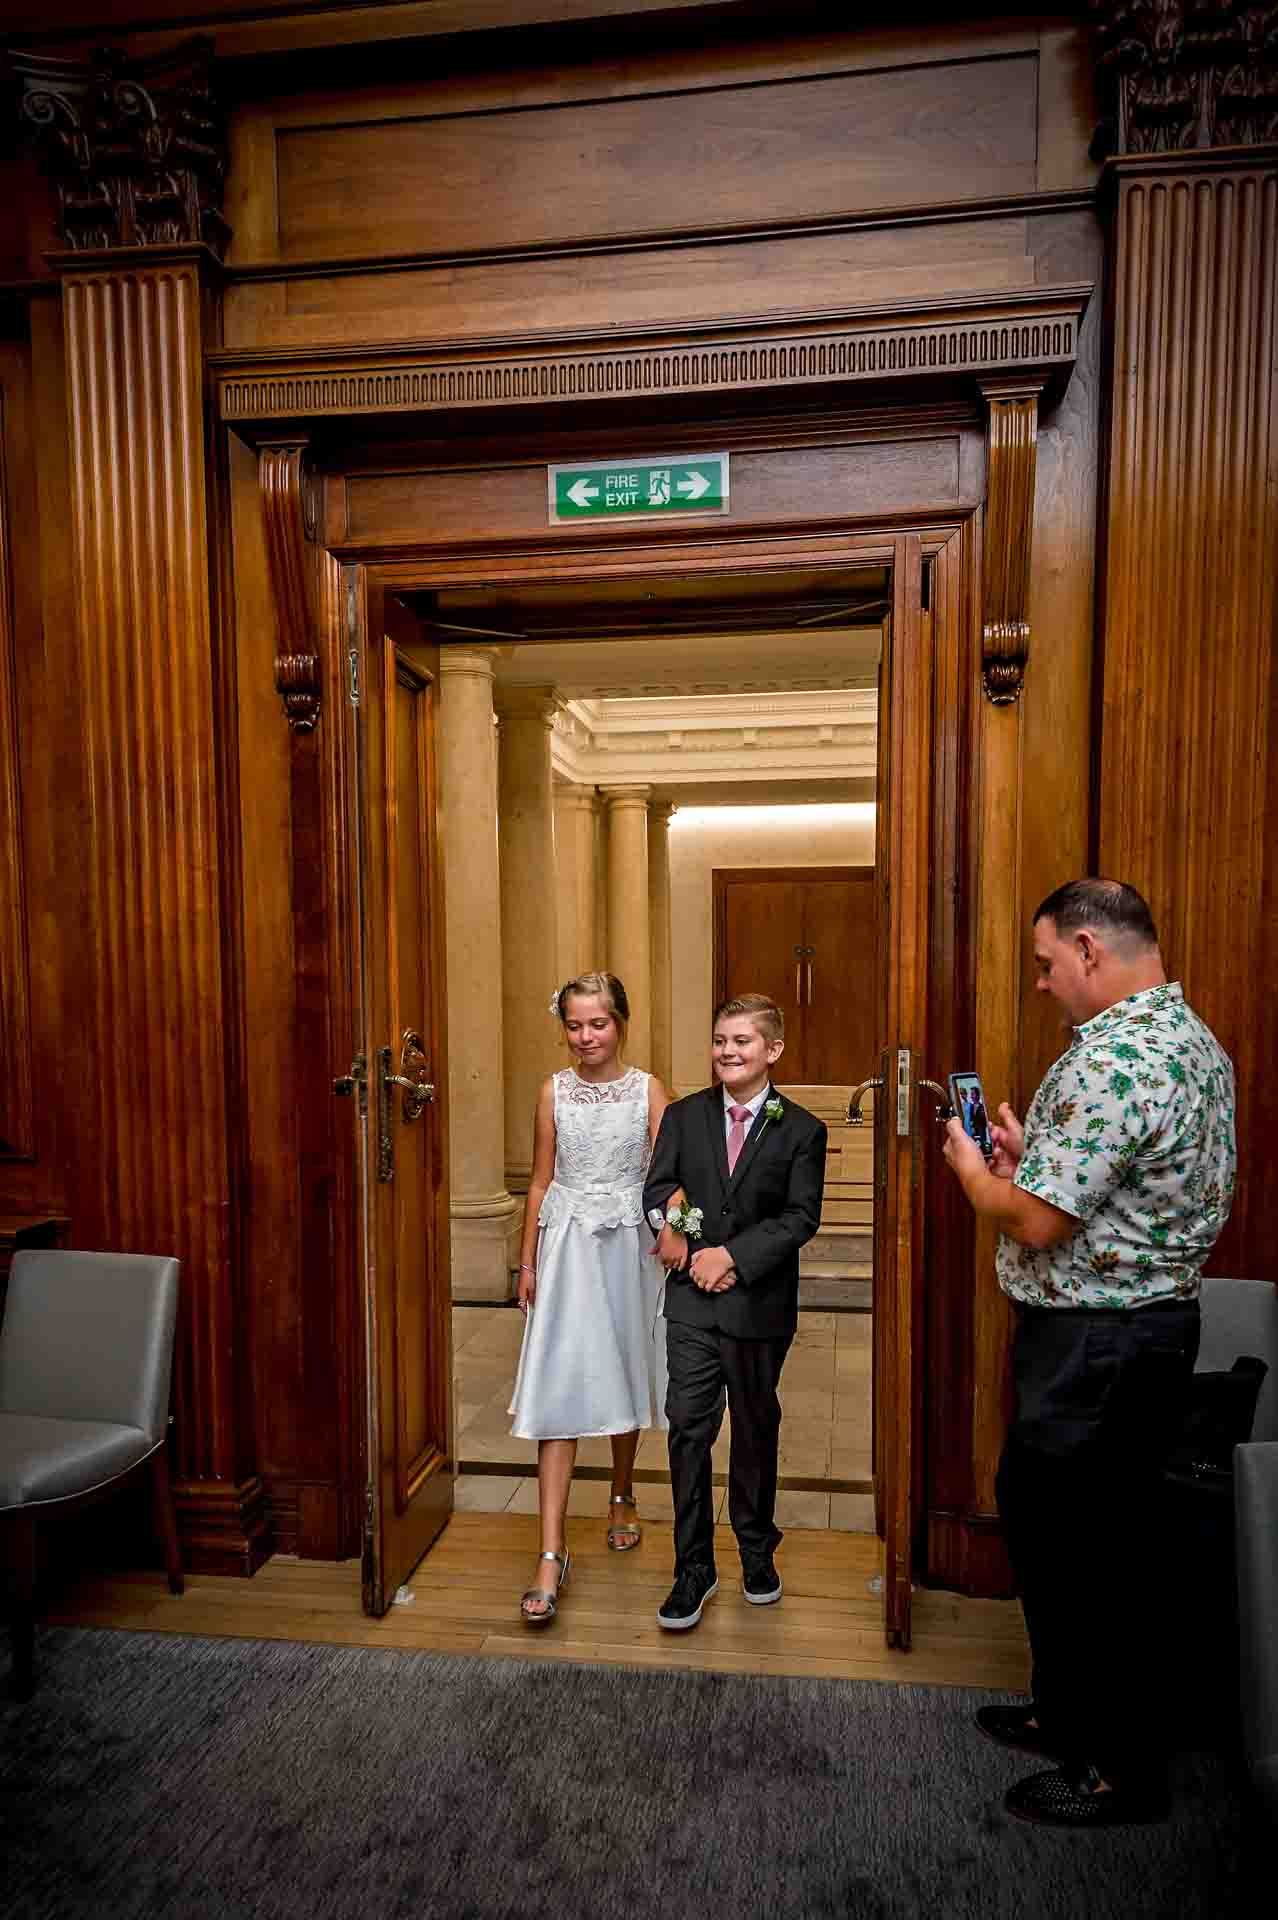 A page boy and bridesmaid entering the Westminster Room at Old Marylebone Town Hall